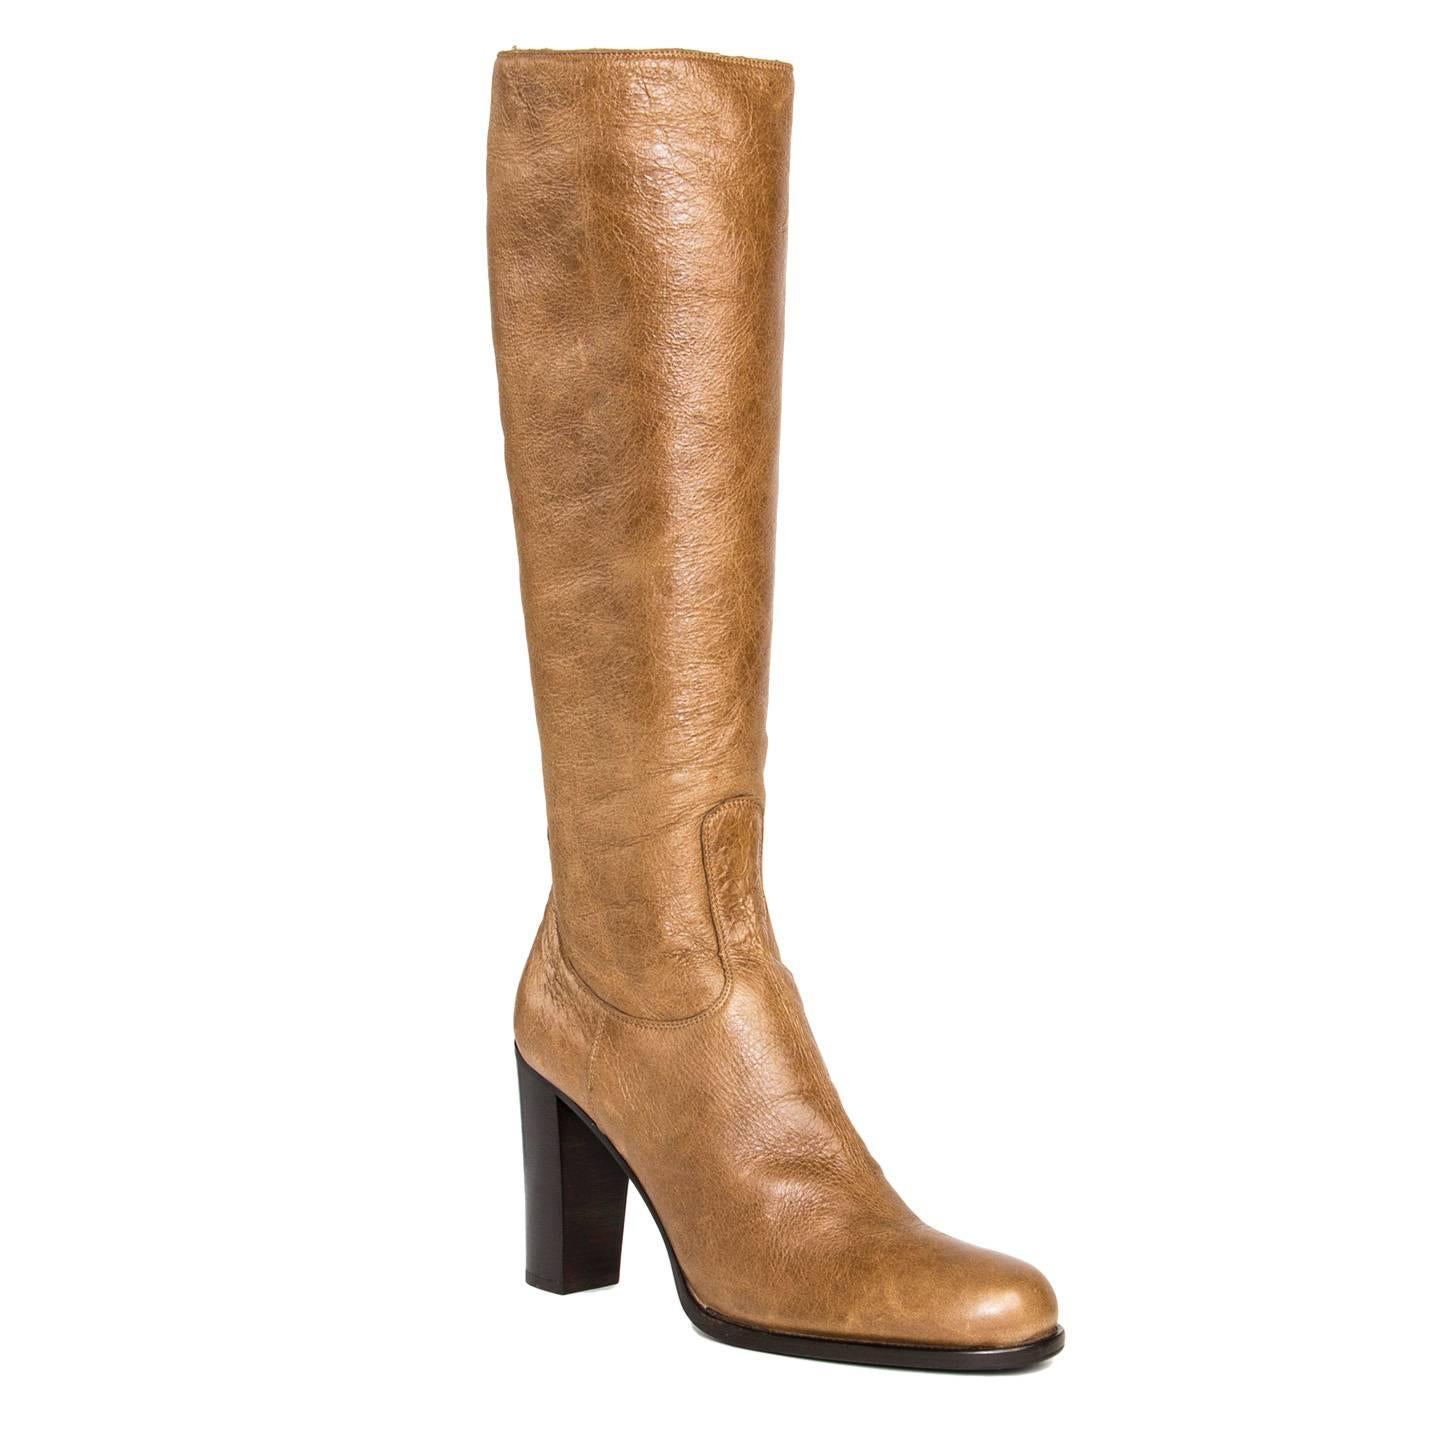 Desert tan leather shearling knee high boots with round toe and instep zipper. The sole and the heel are dark brown to create a contrast. Vero Cuoio. Made in Italy. Heel 4